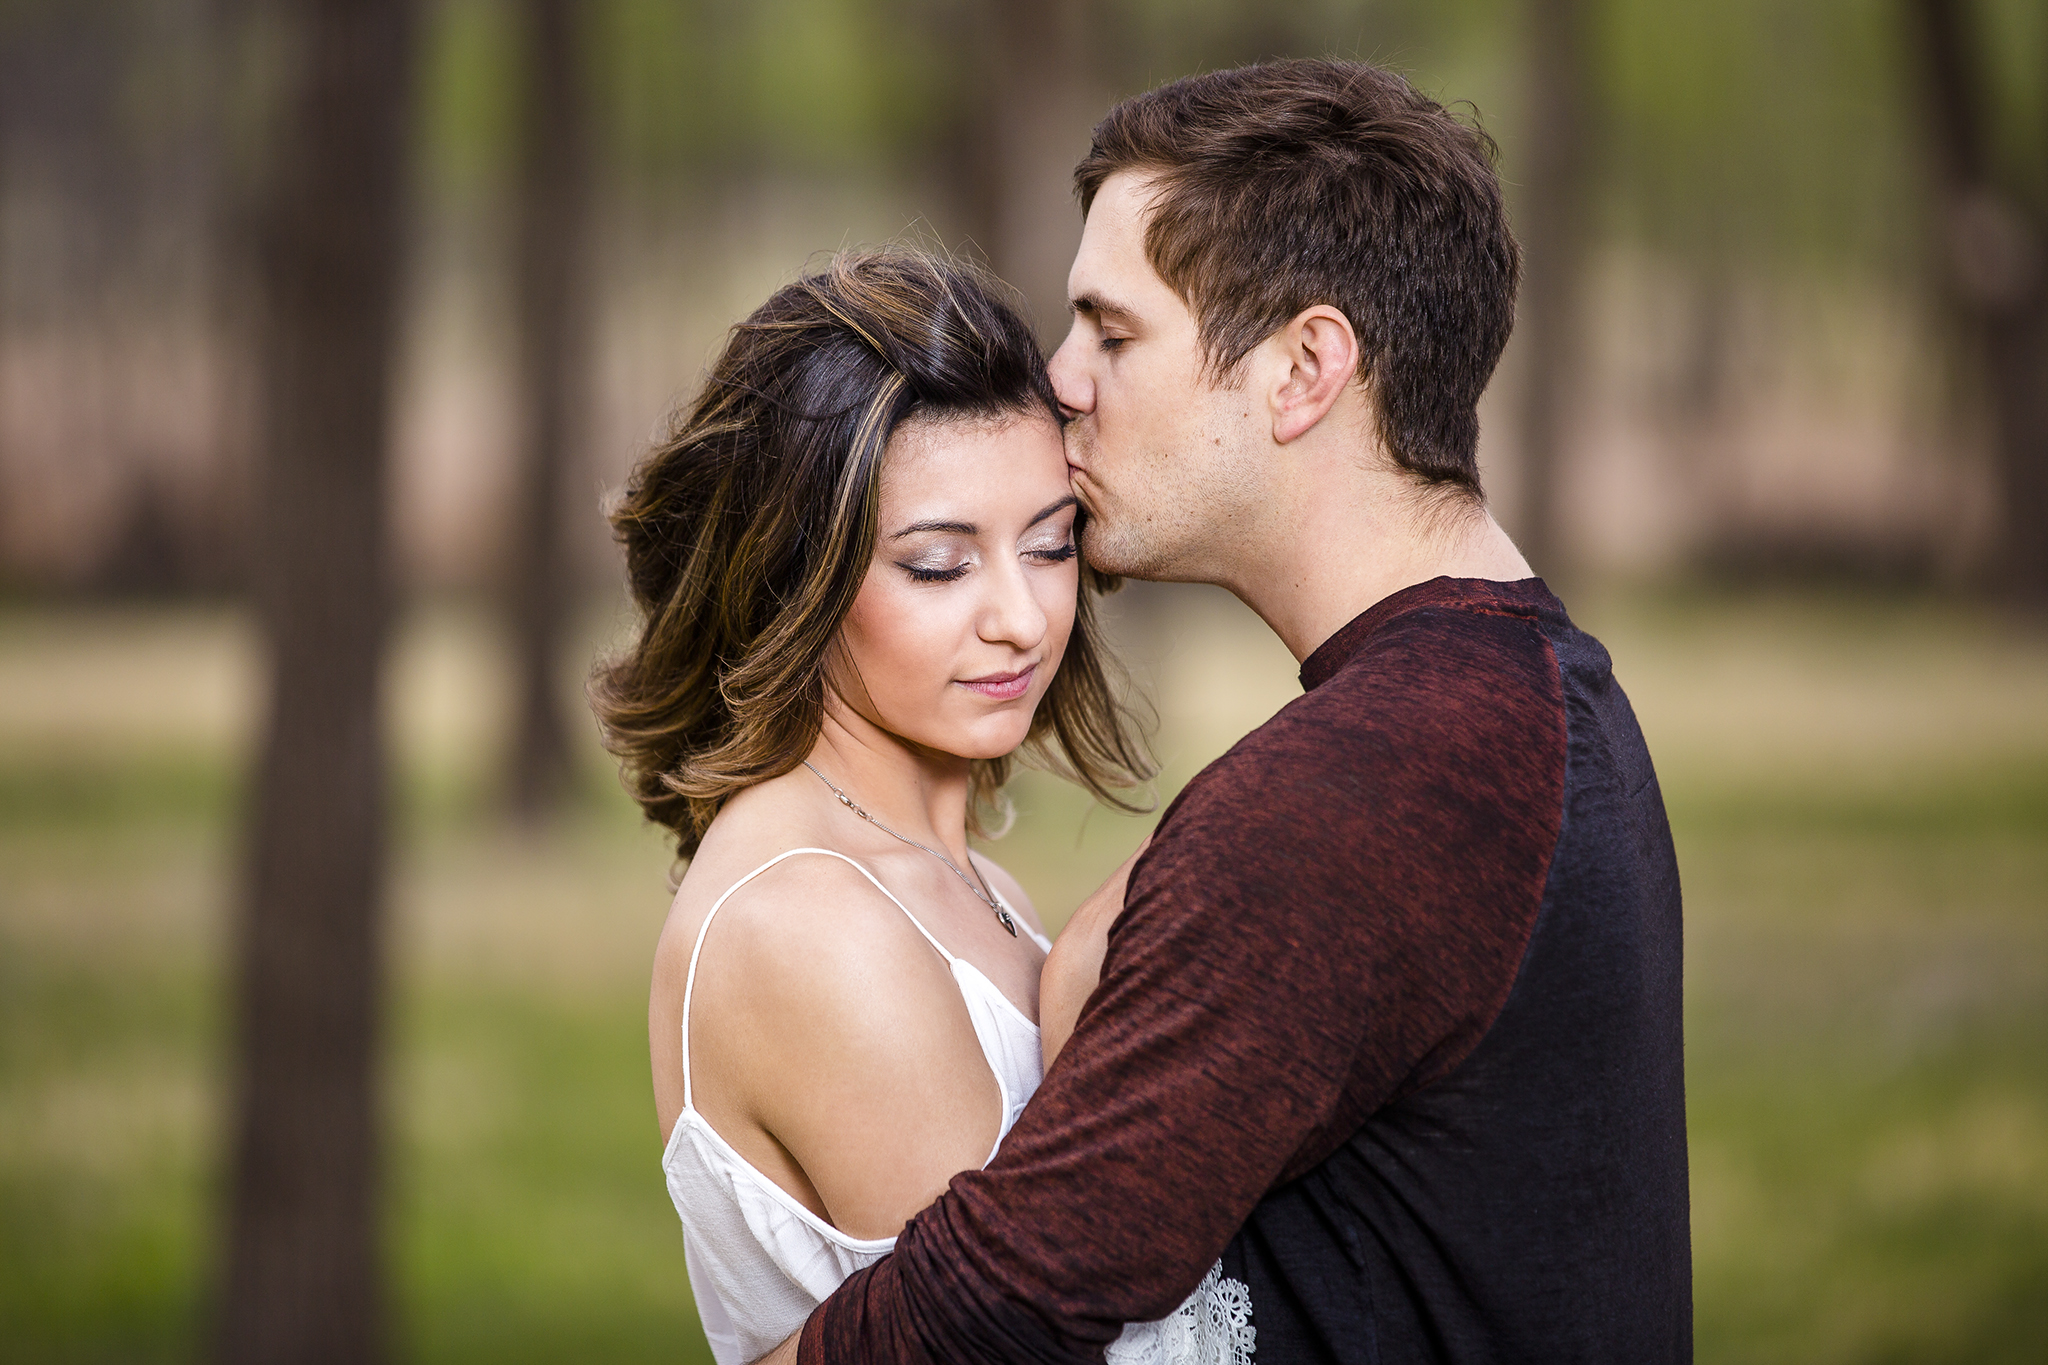 romantic moments, sexy engagement photography, cute, natural light